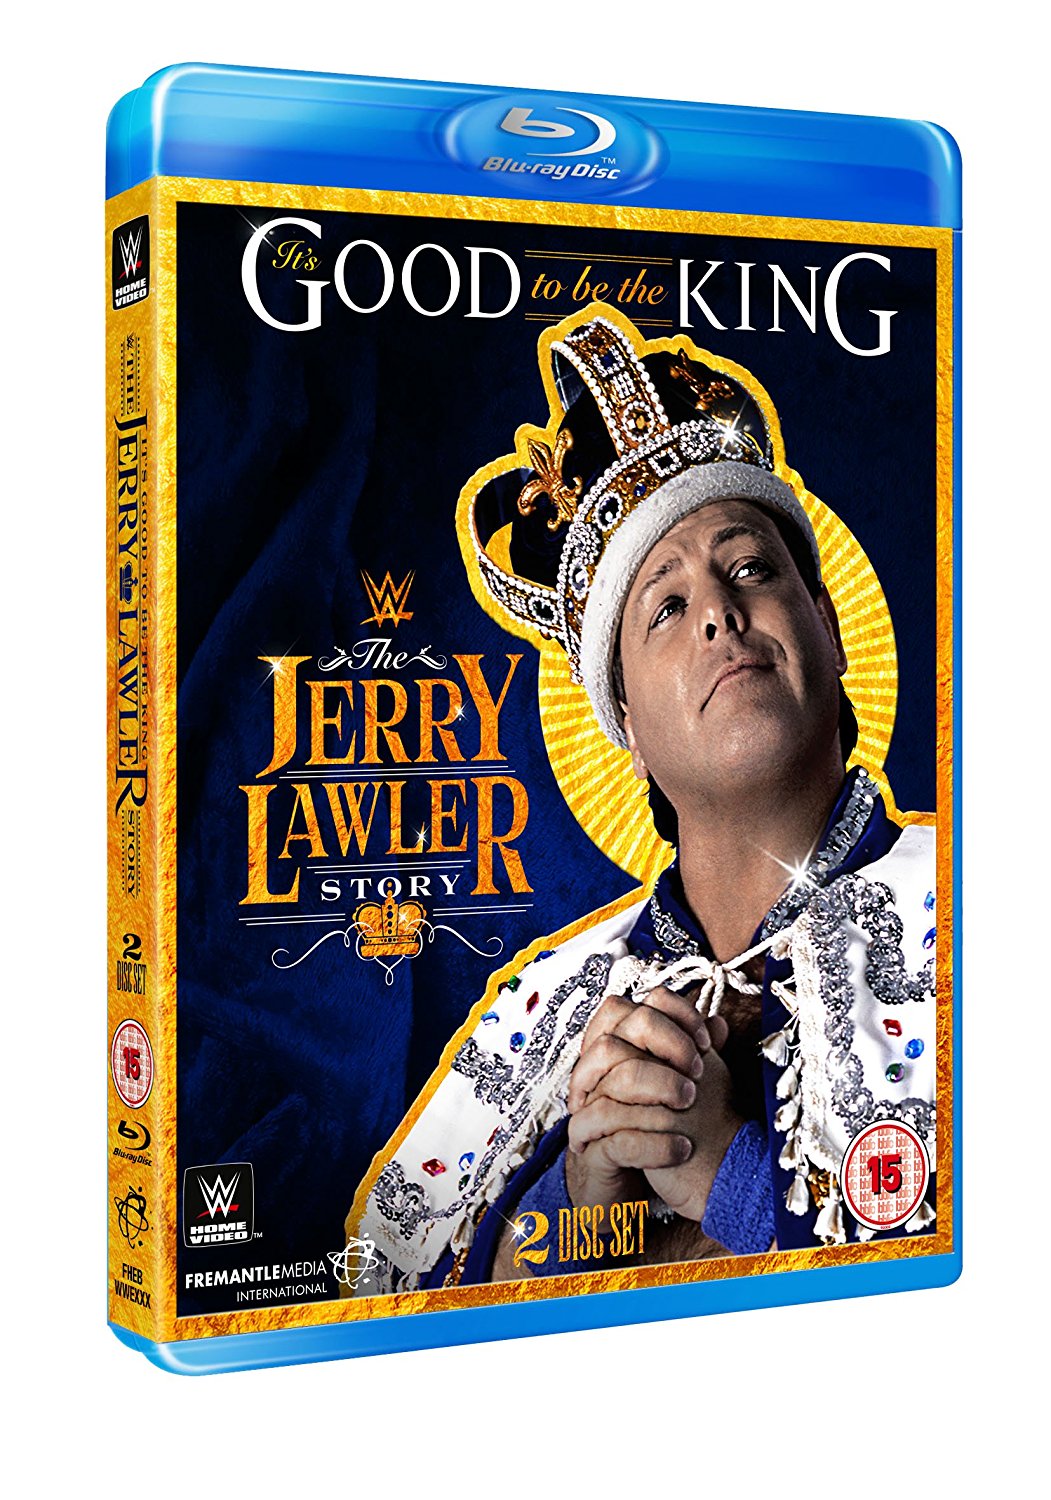 WWE: It's Good To Be The King - The Jerry Lawler Story (Blu-ray)